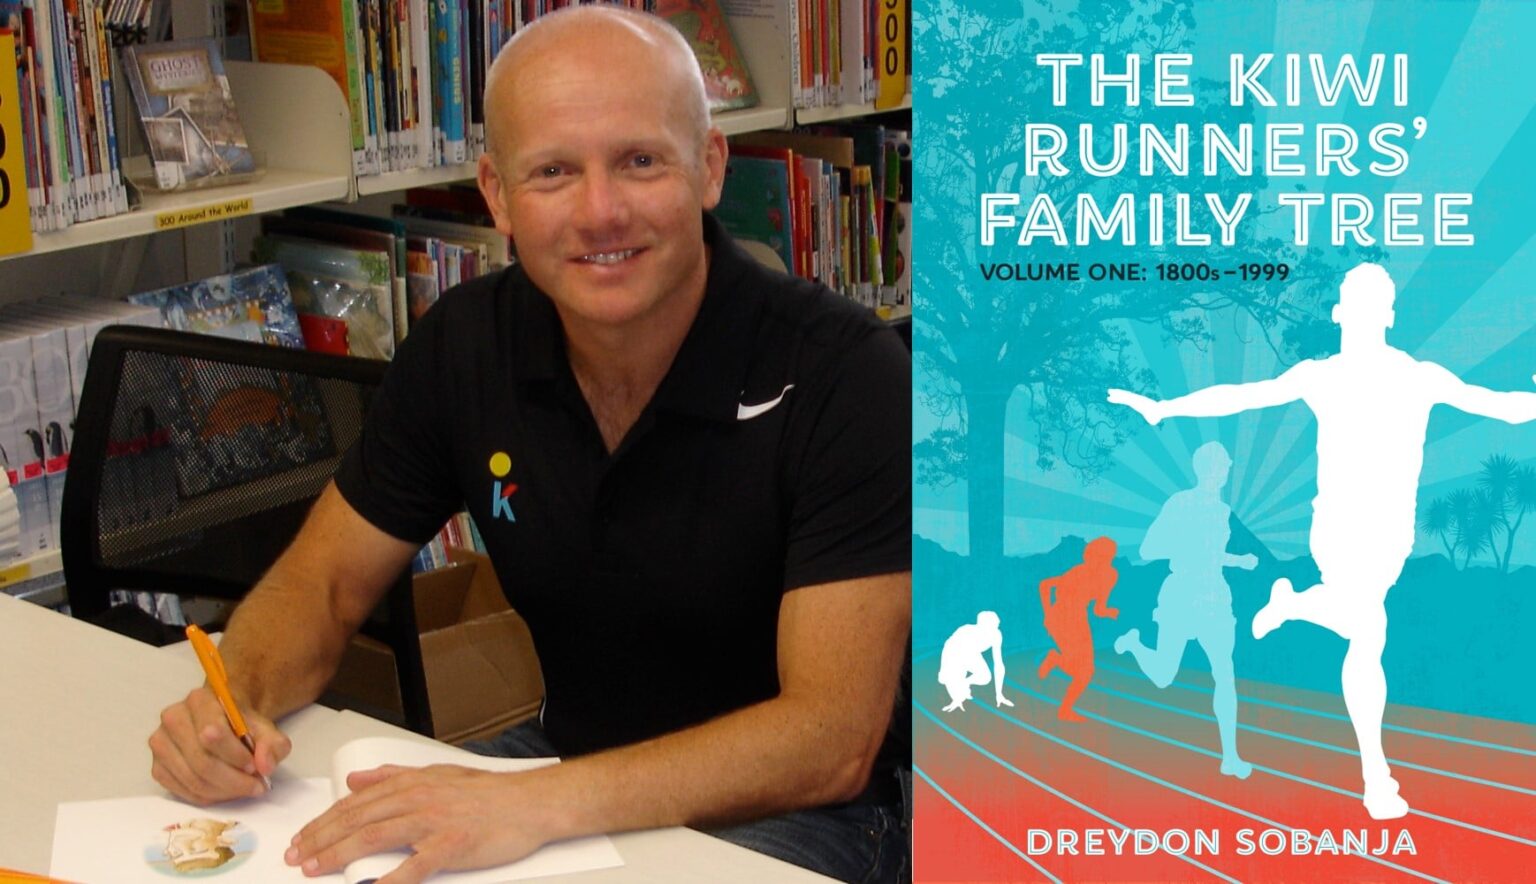 Author Dreydon and cover of the Kiwi Runners' Family Tree